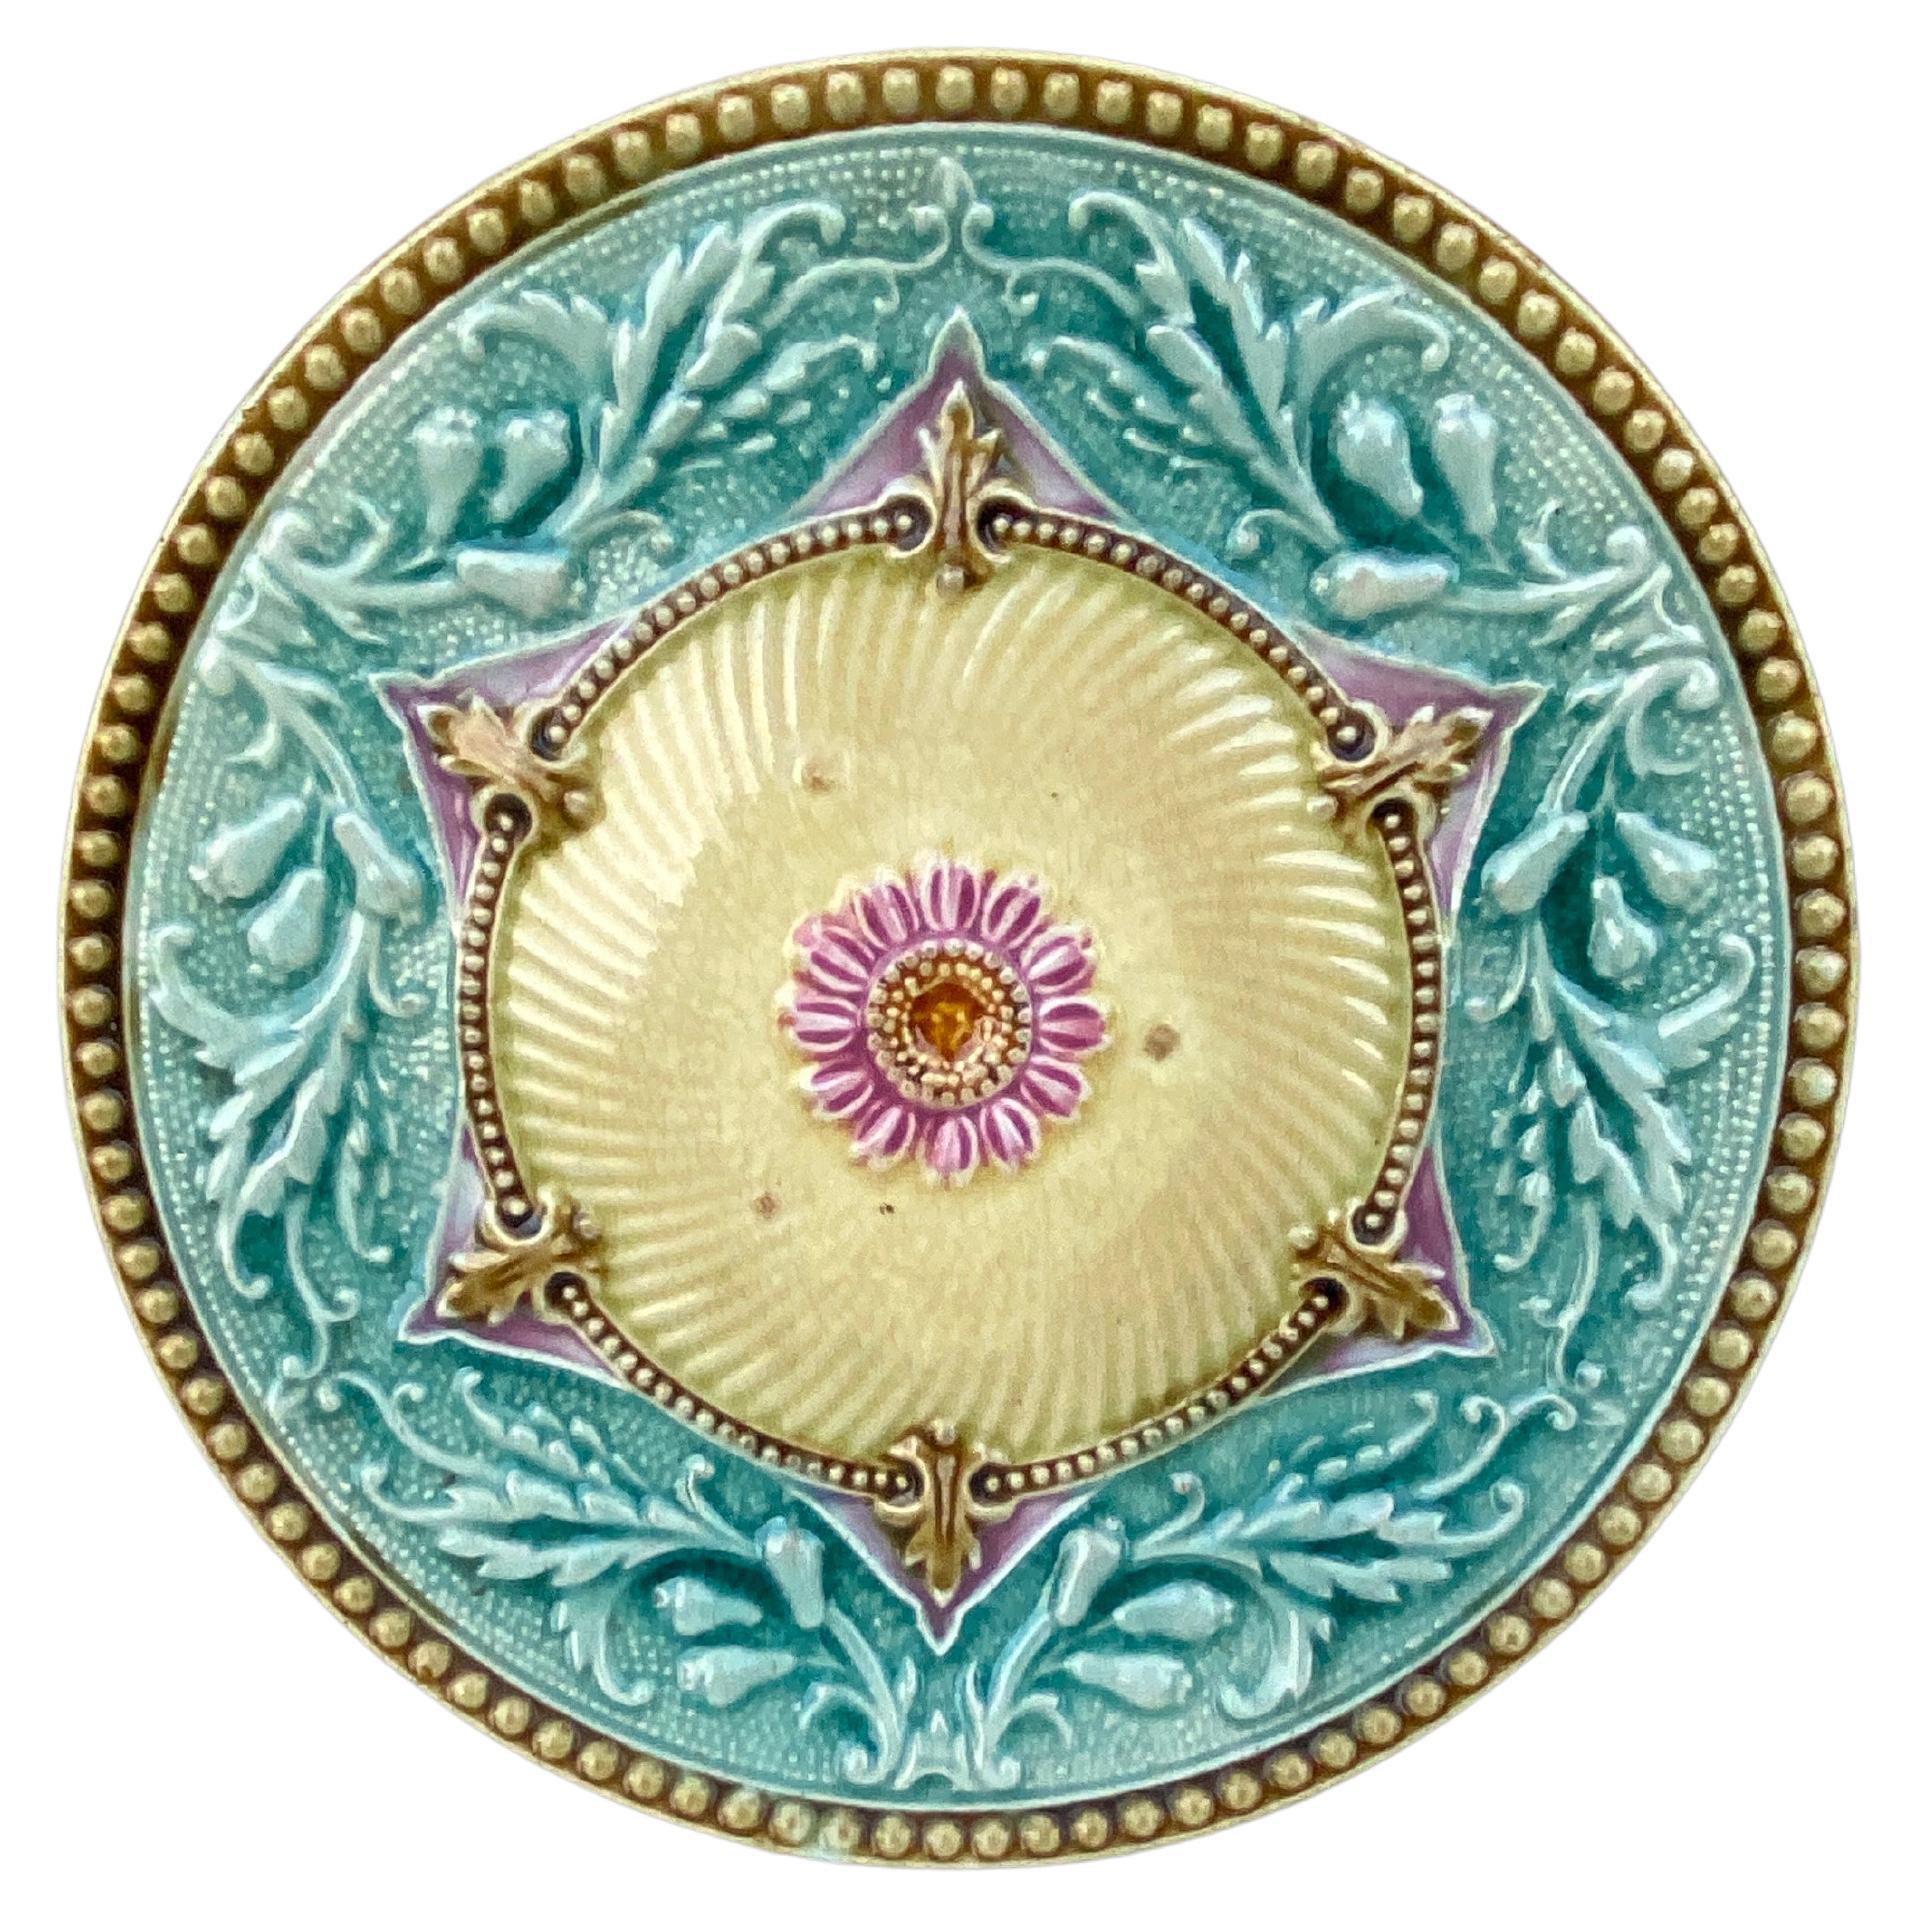 19th Century French Majolica Plate